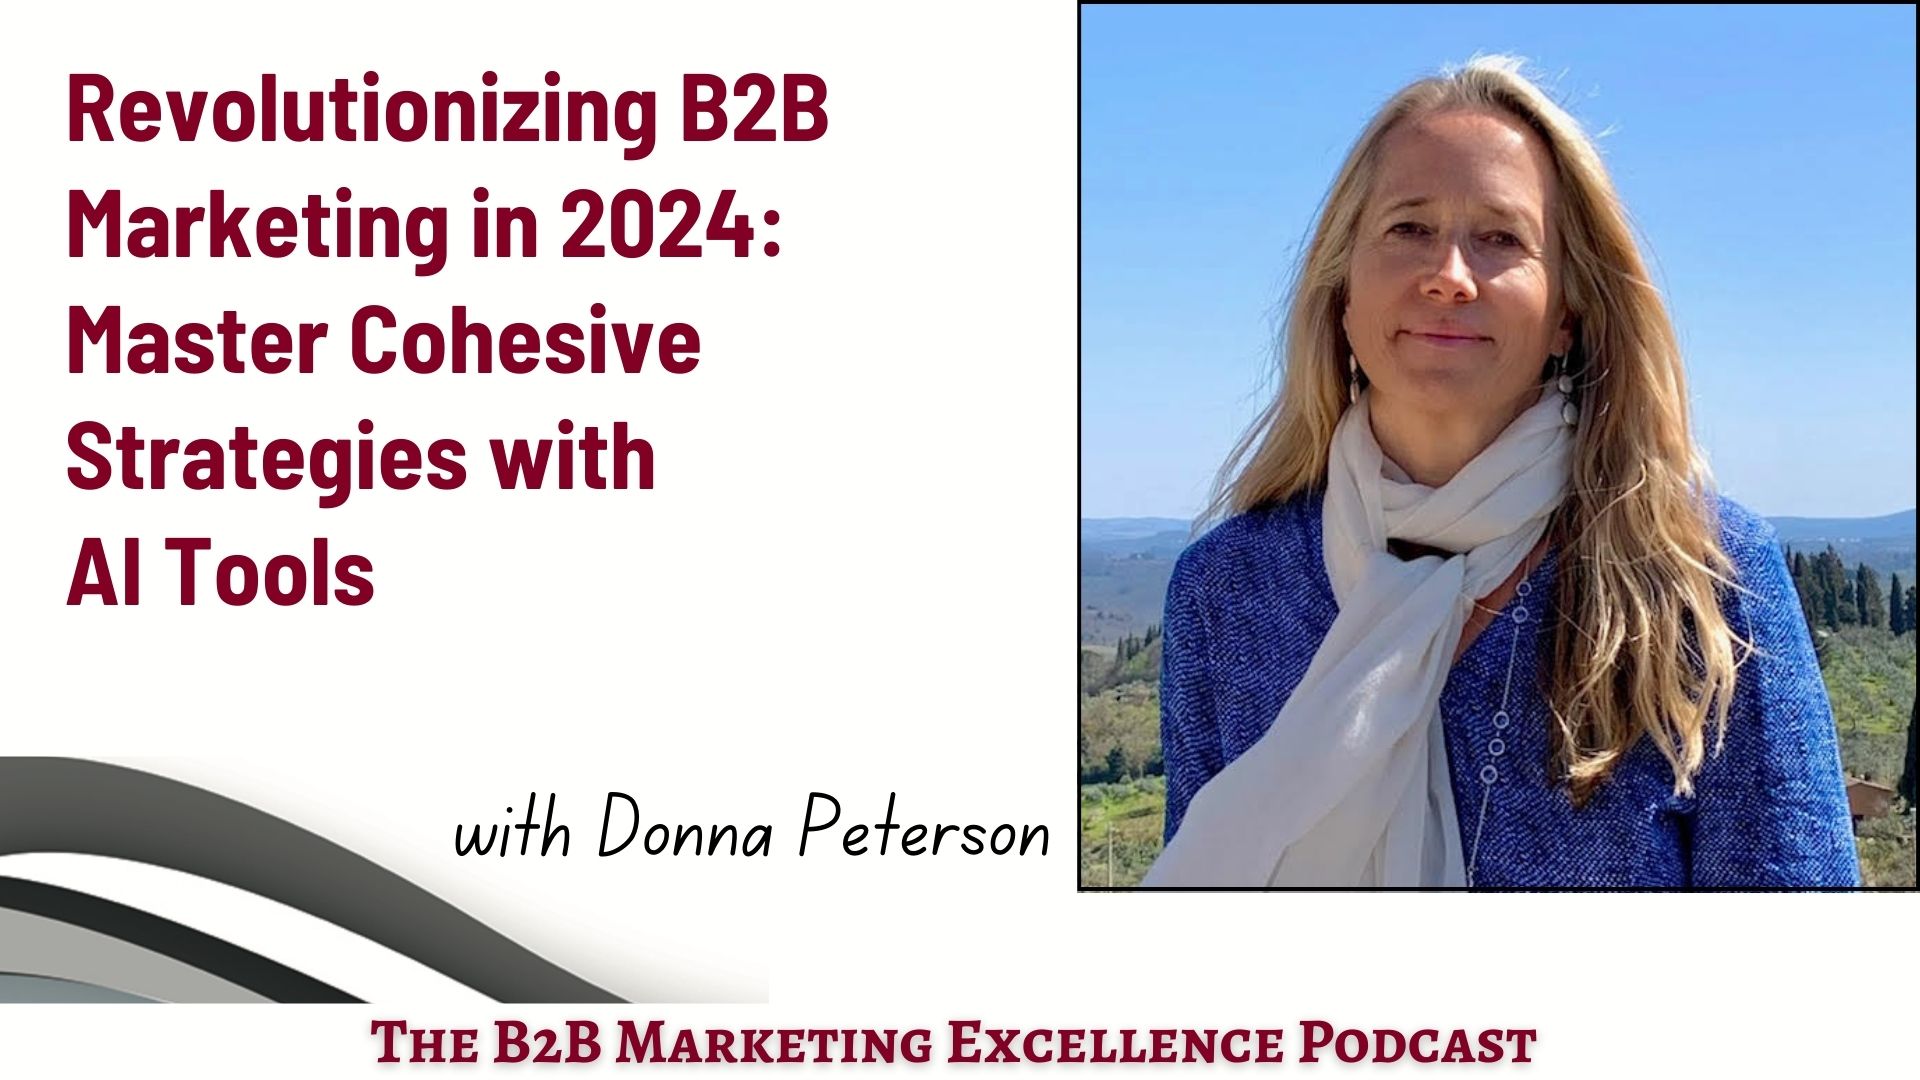 Podcast – Revolutionizing B2B Marketing in 2024 – Master Cohesive Strategies with AI Tools